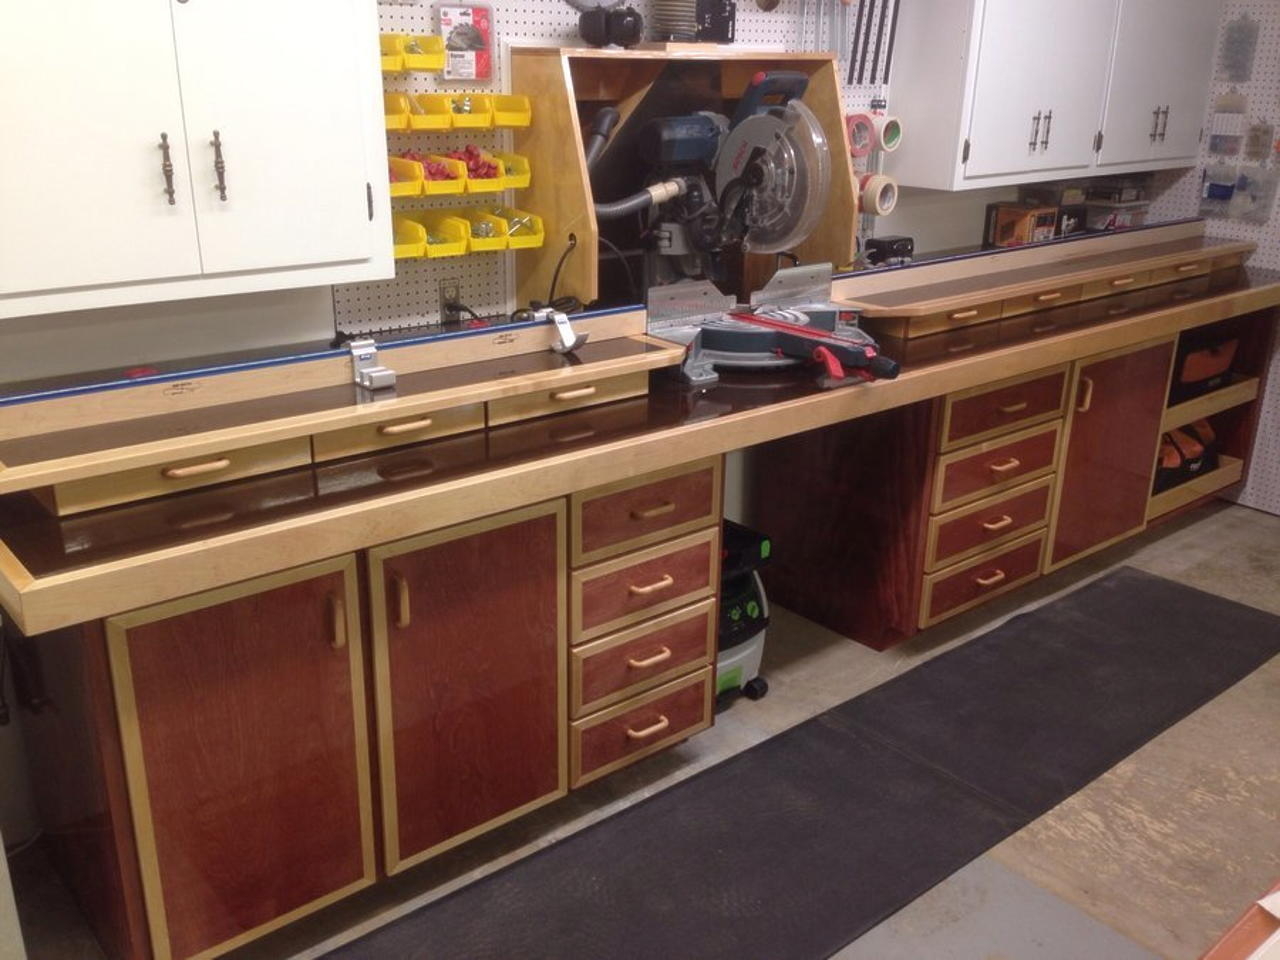 Table saw bench plans free